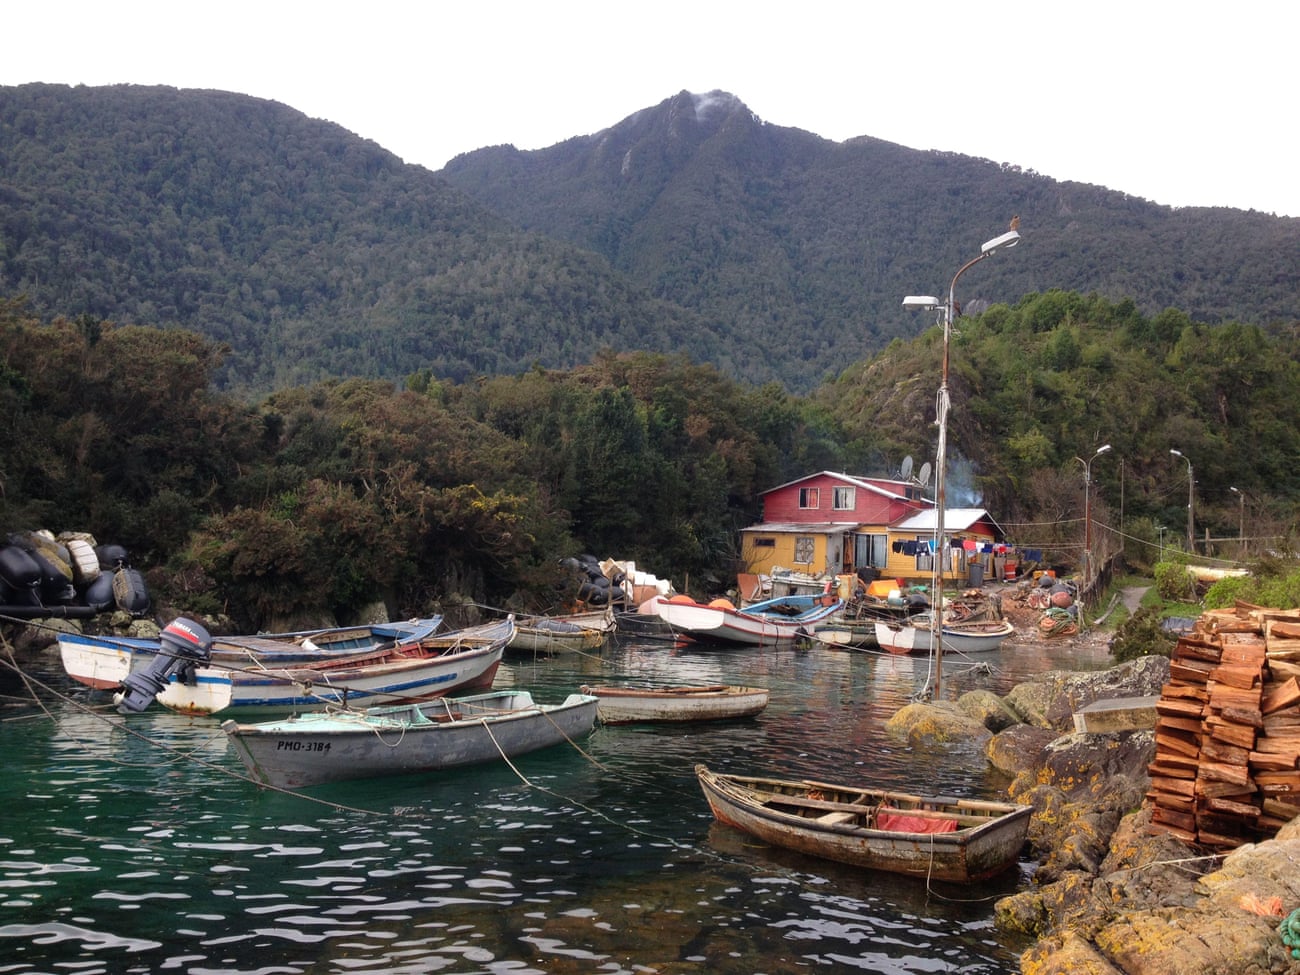 Boats moored in small harbour. House at edge of water, steep wooded hills behind.